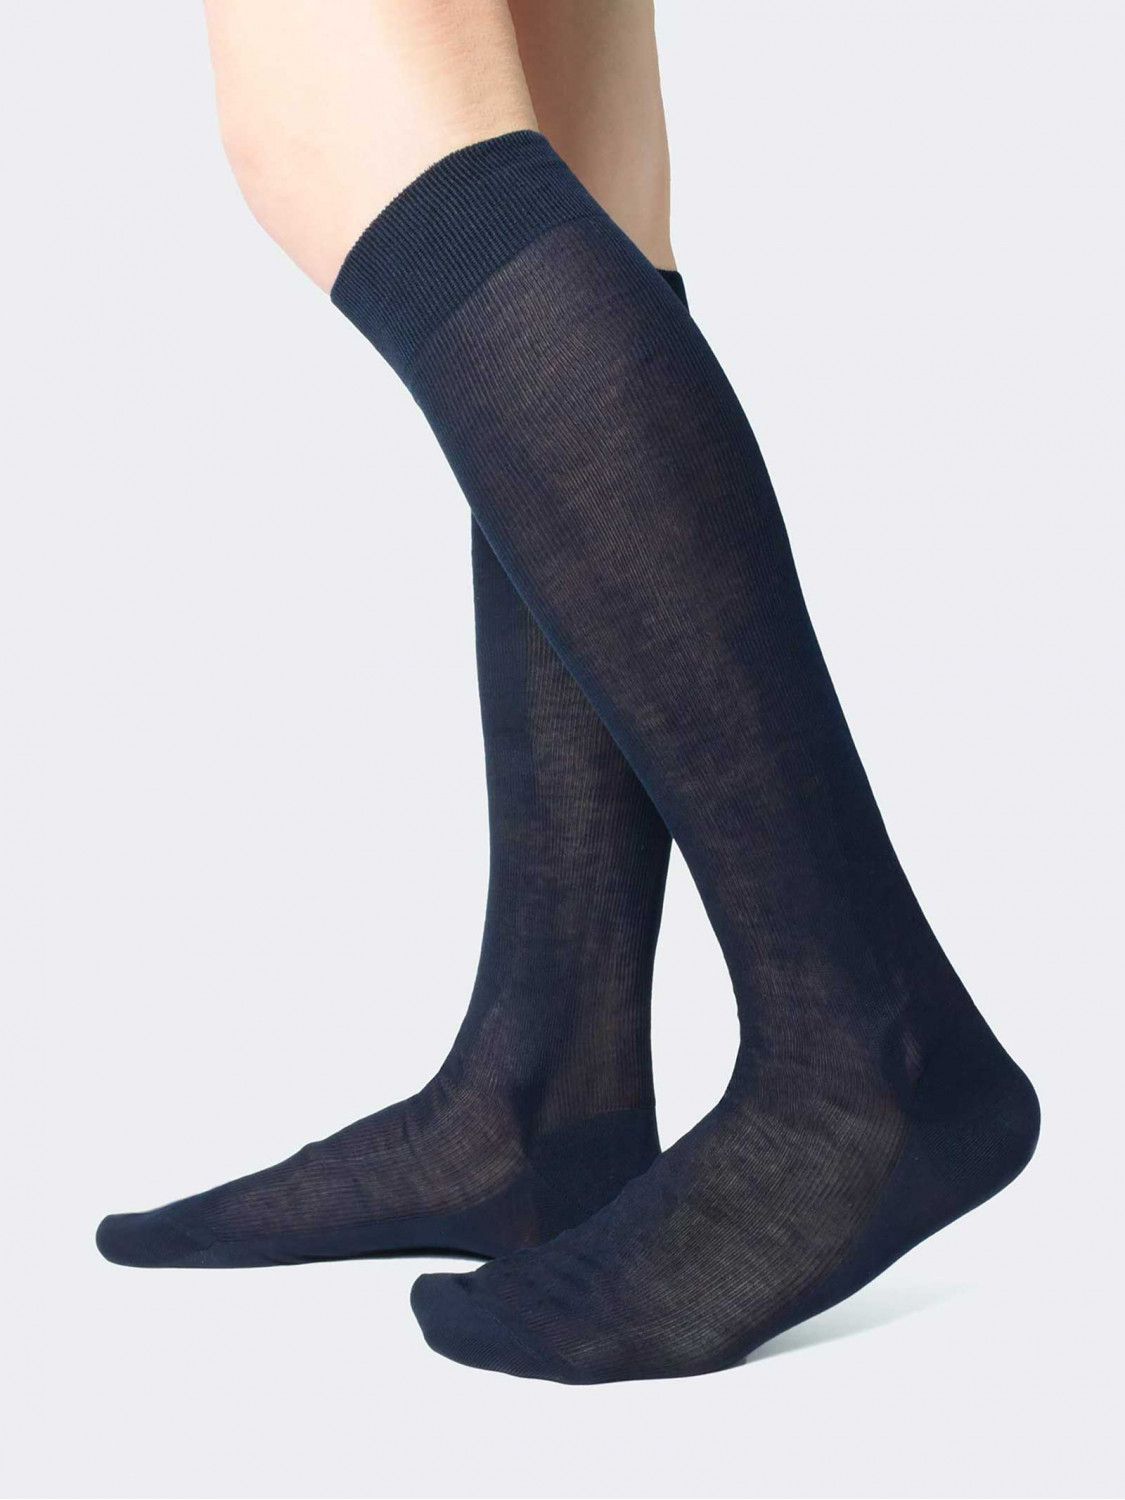 Ribbed 1:1 Knee high socks, 100% cotton - Made in Italy